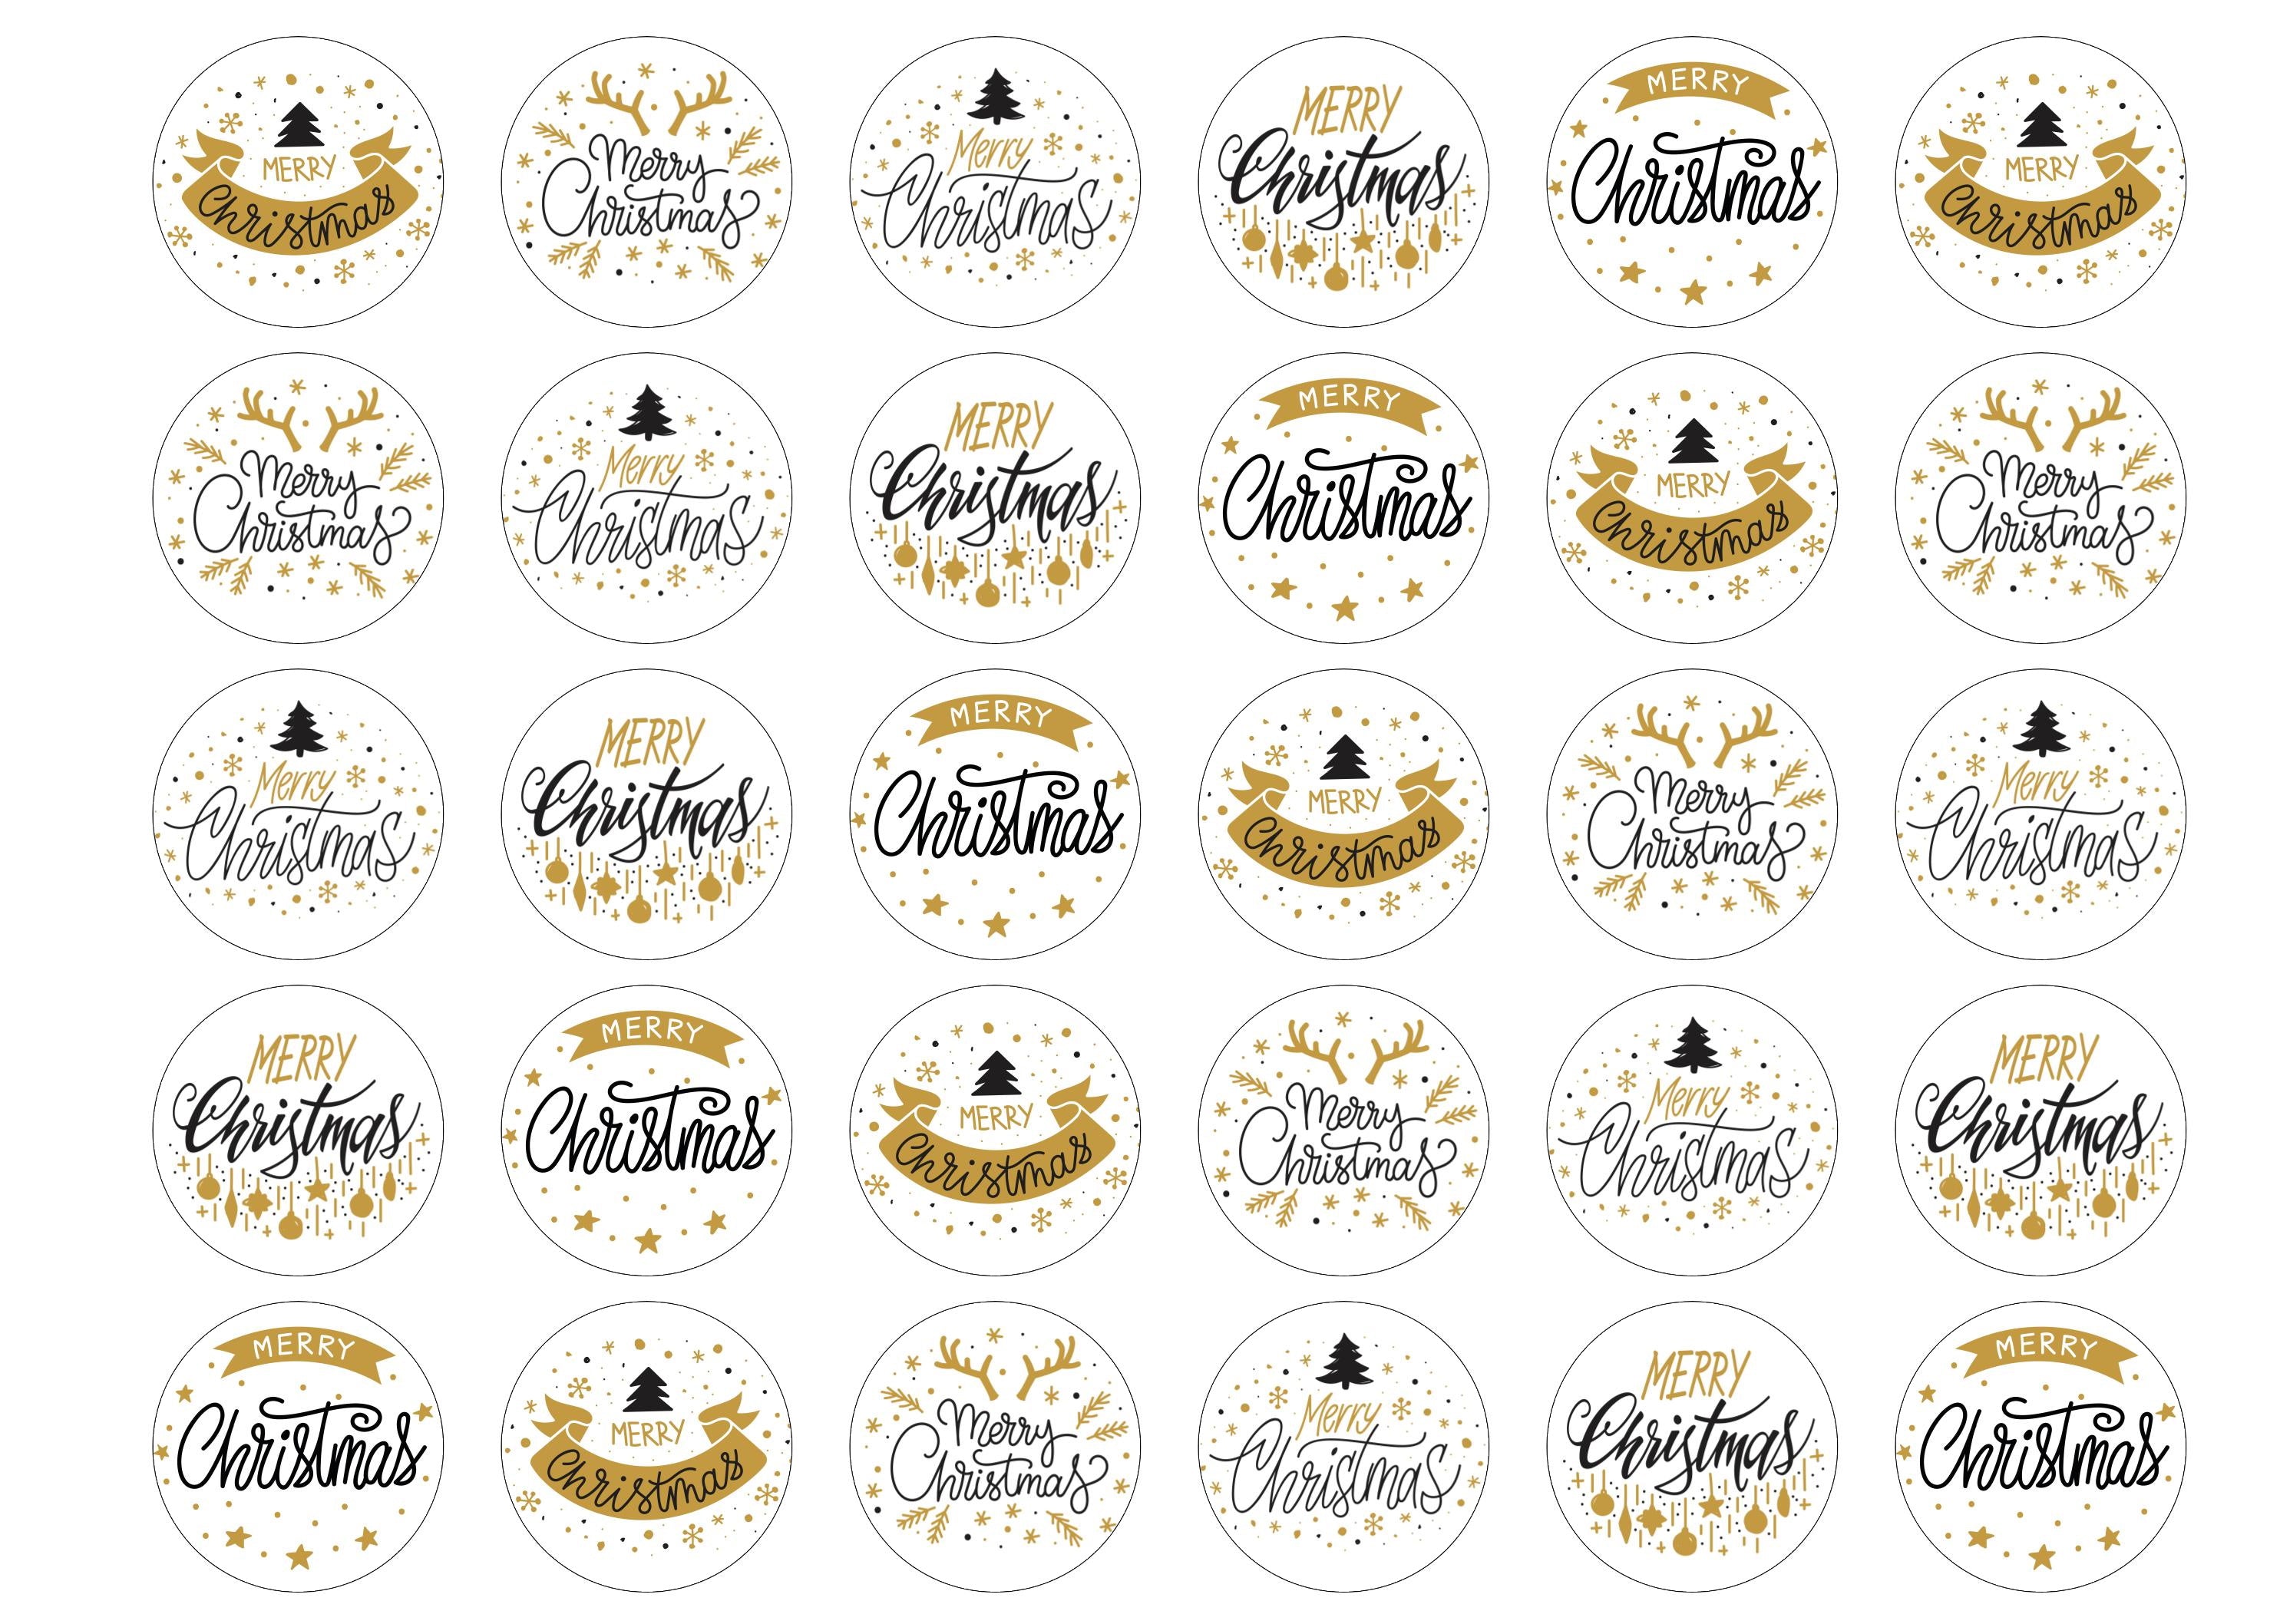 30 edible toppers with Merry Christmas messages in black and gold